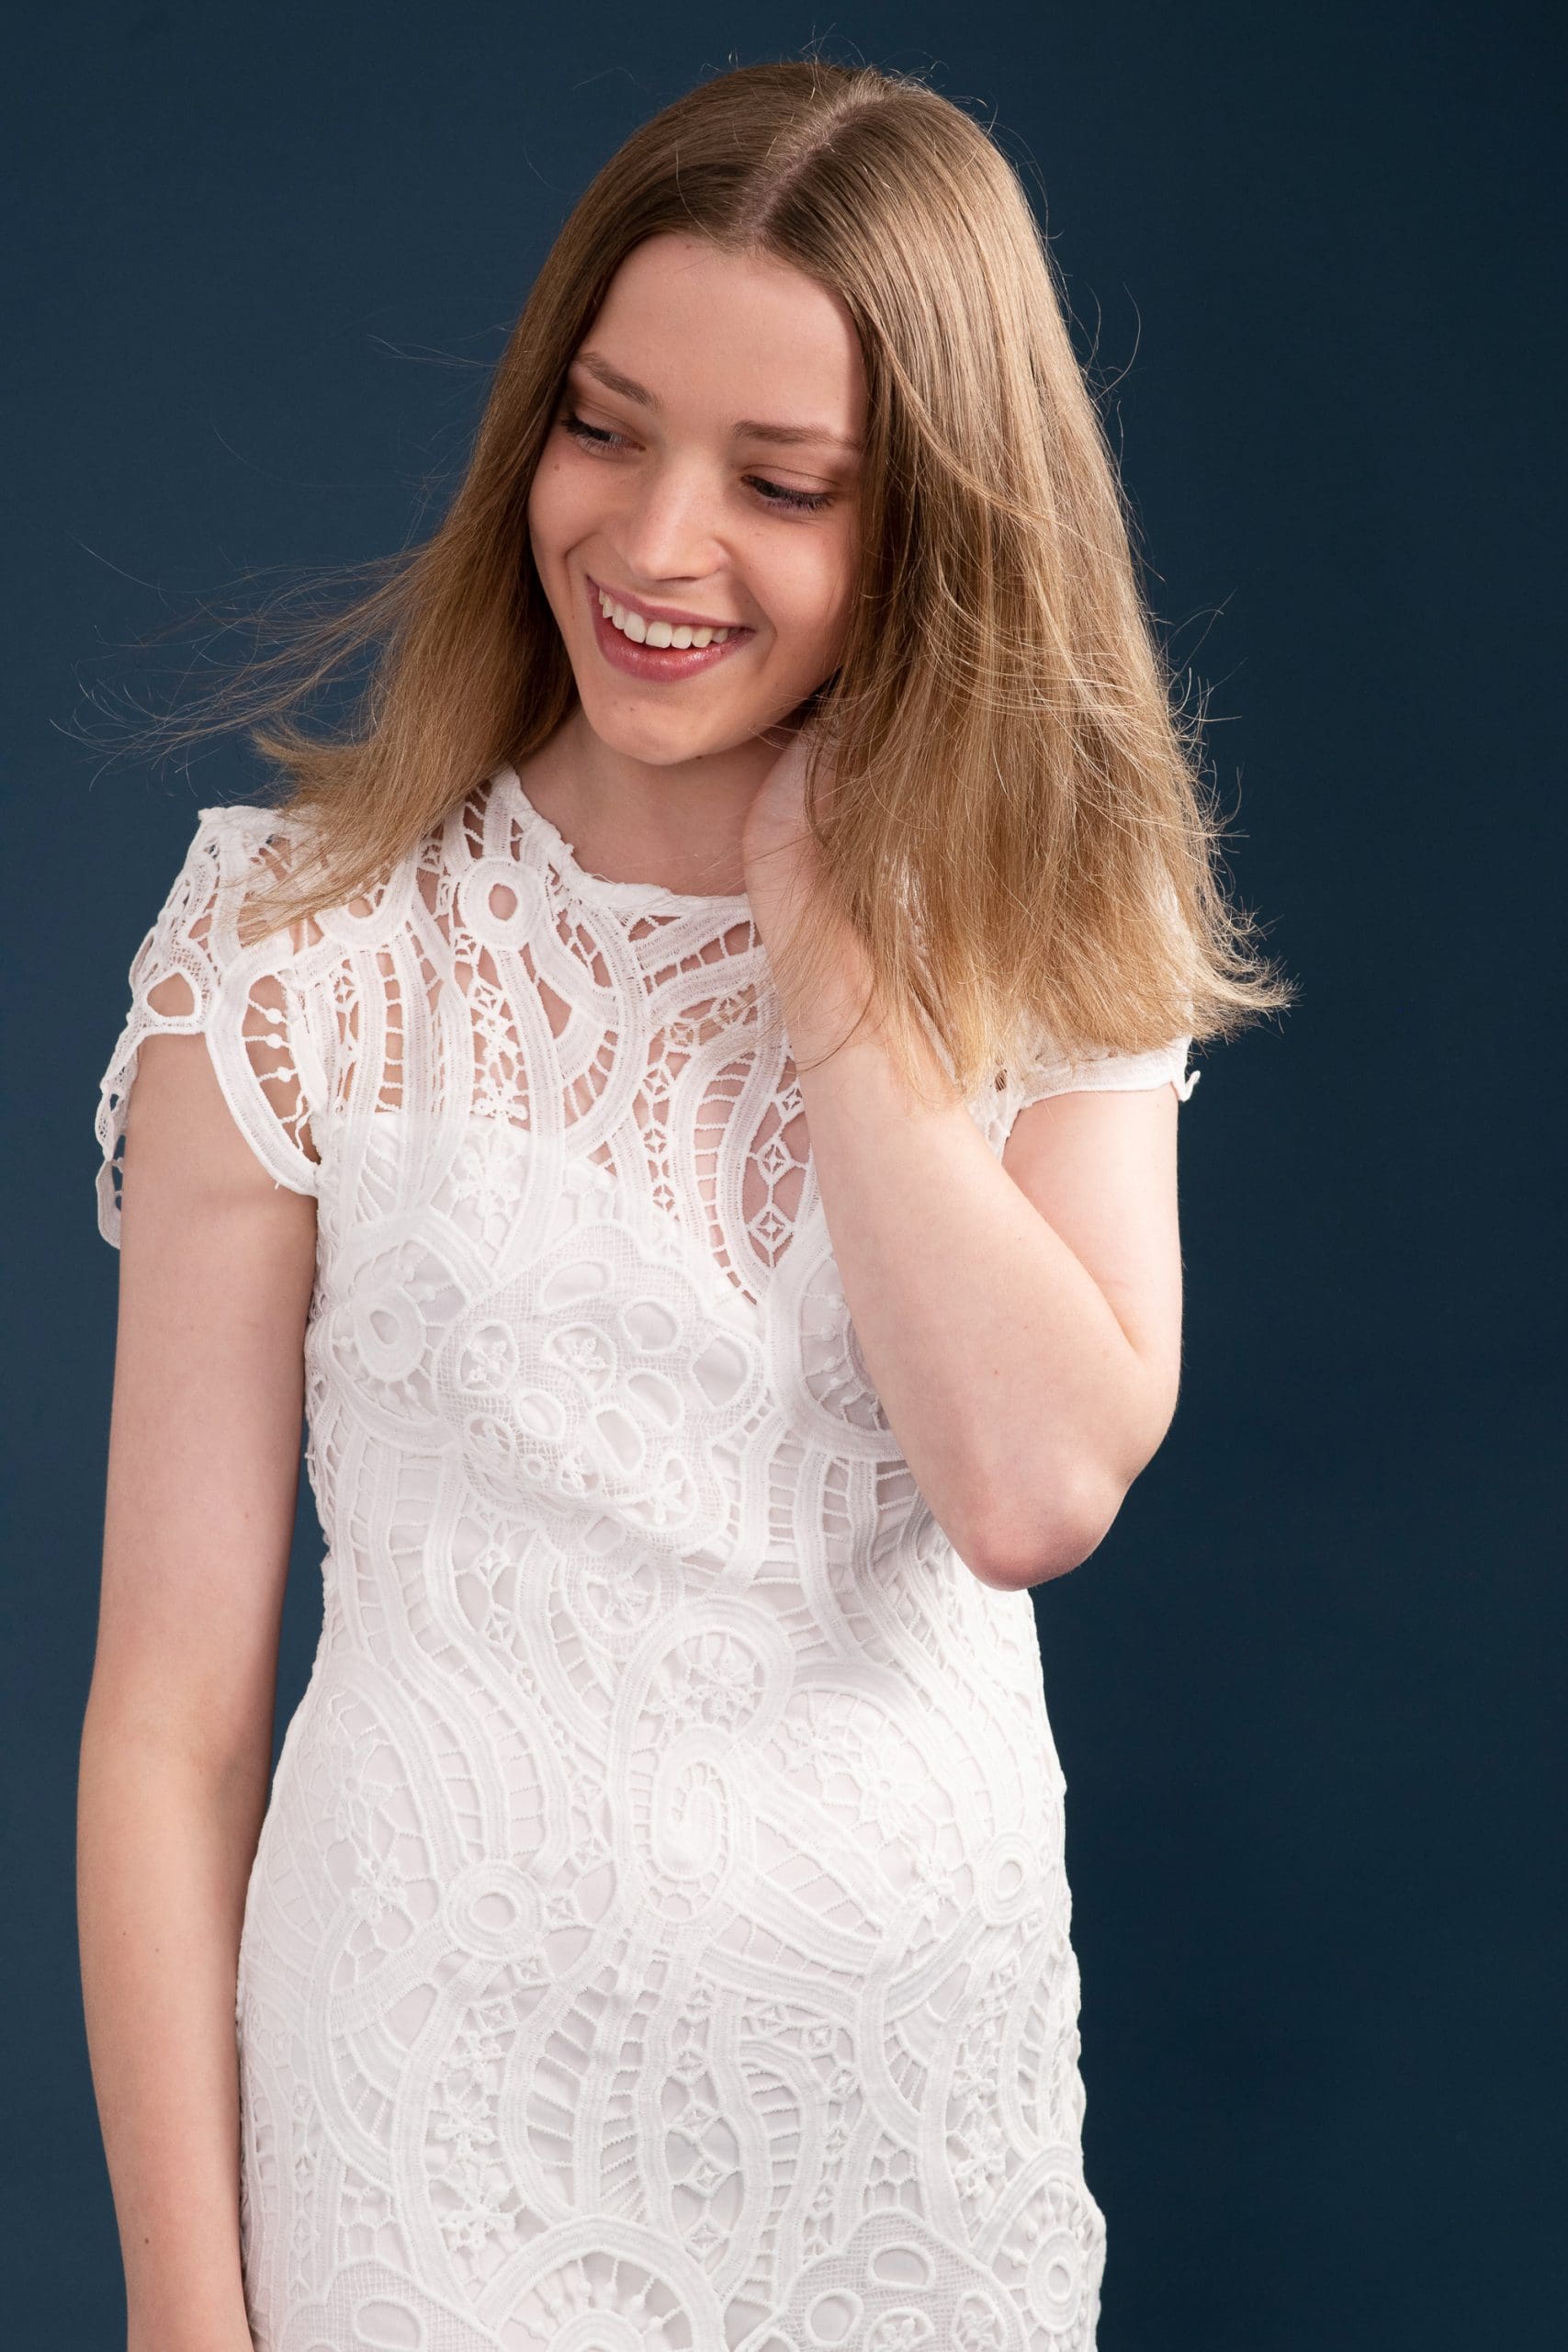 Melbourne teen model in a portfolio update, showing a candid smile looking away from camera.